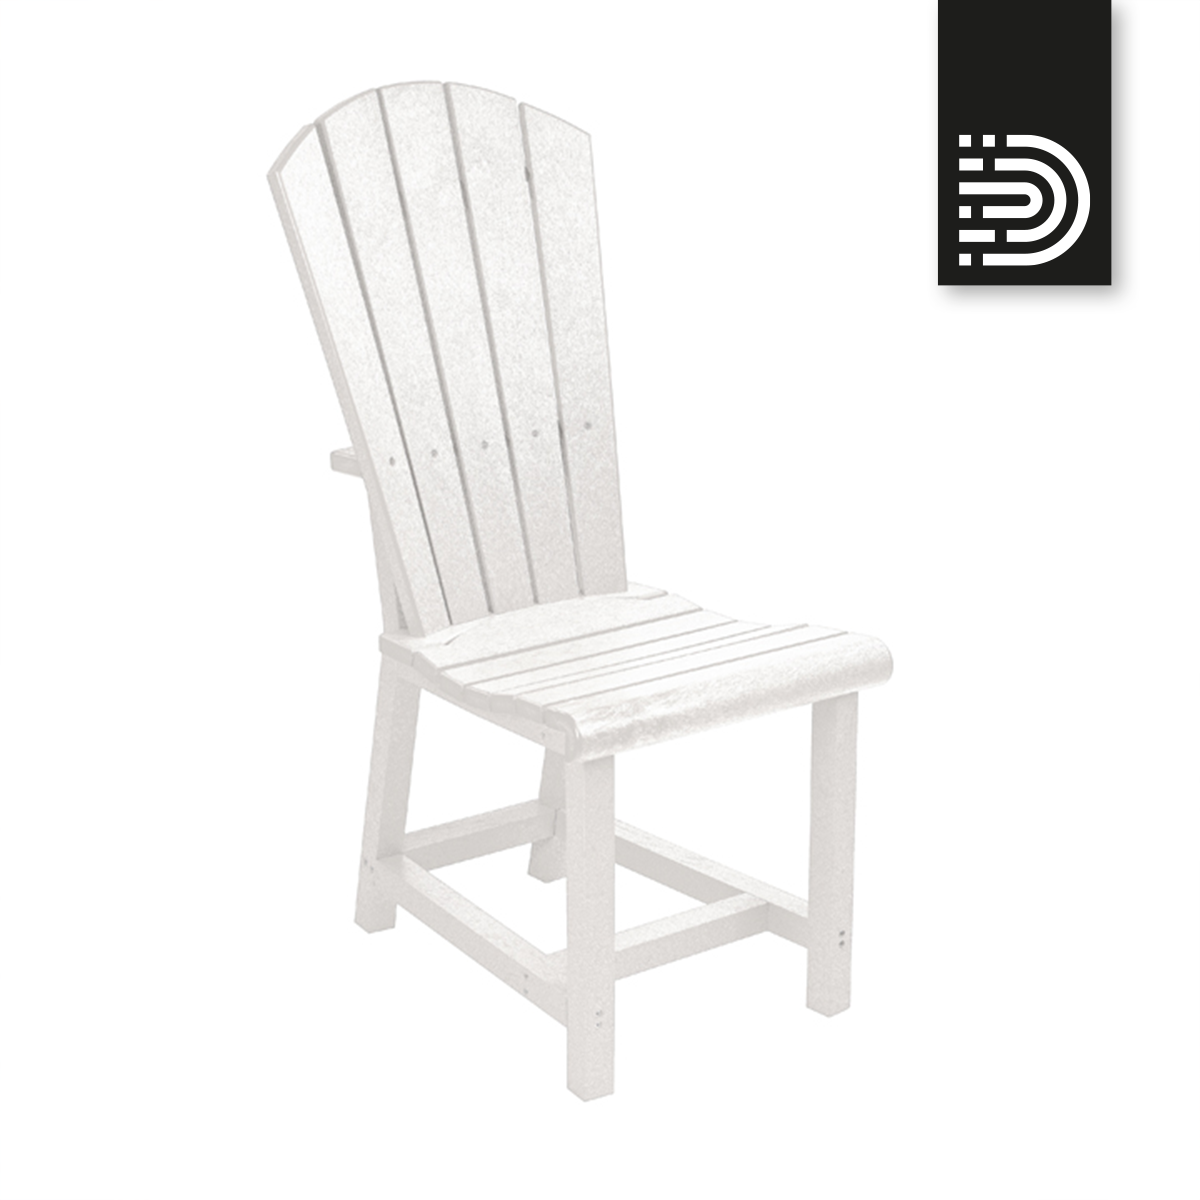 C11 Addy Dining Side Chair - white 02